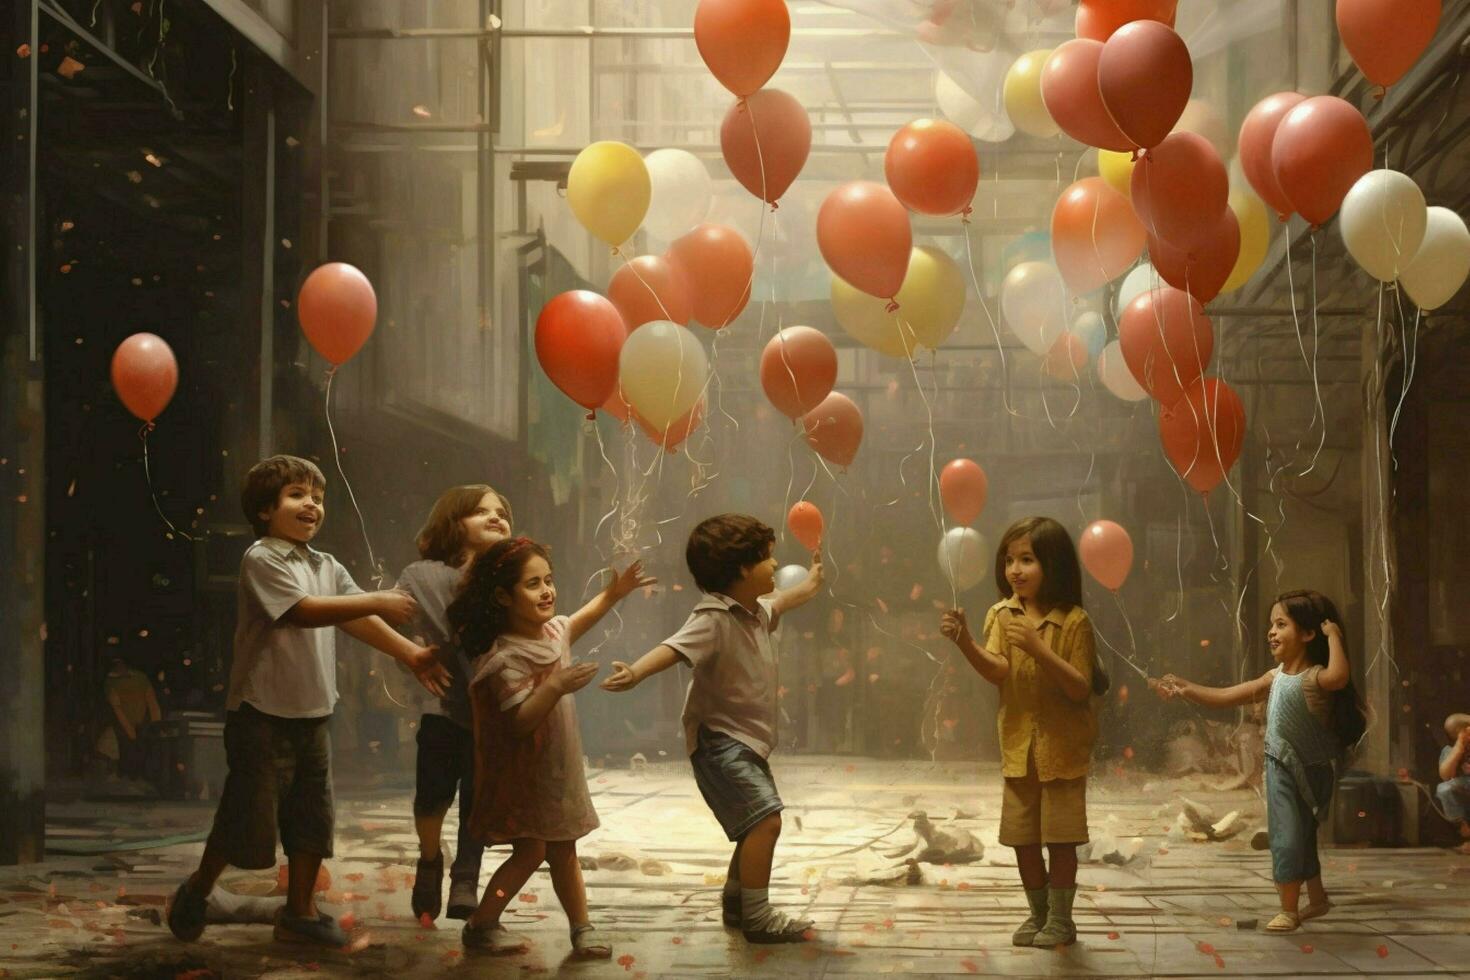 Children playing with balloons photo